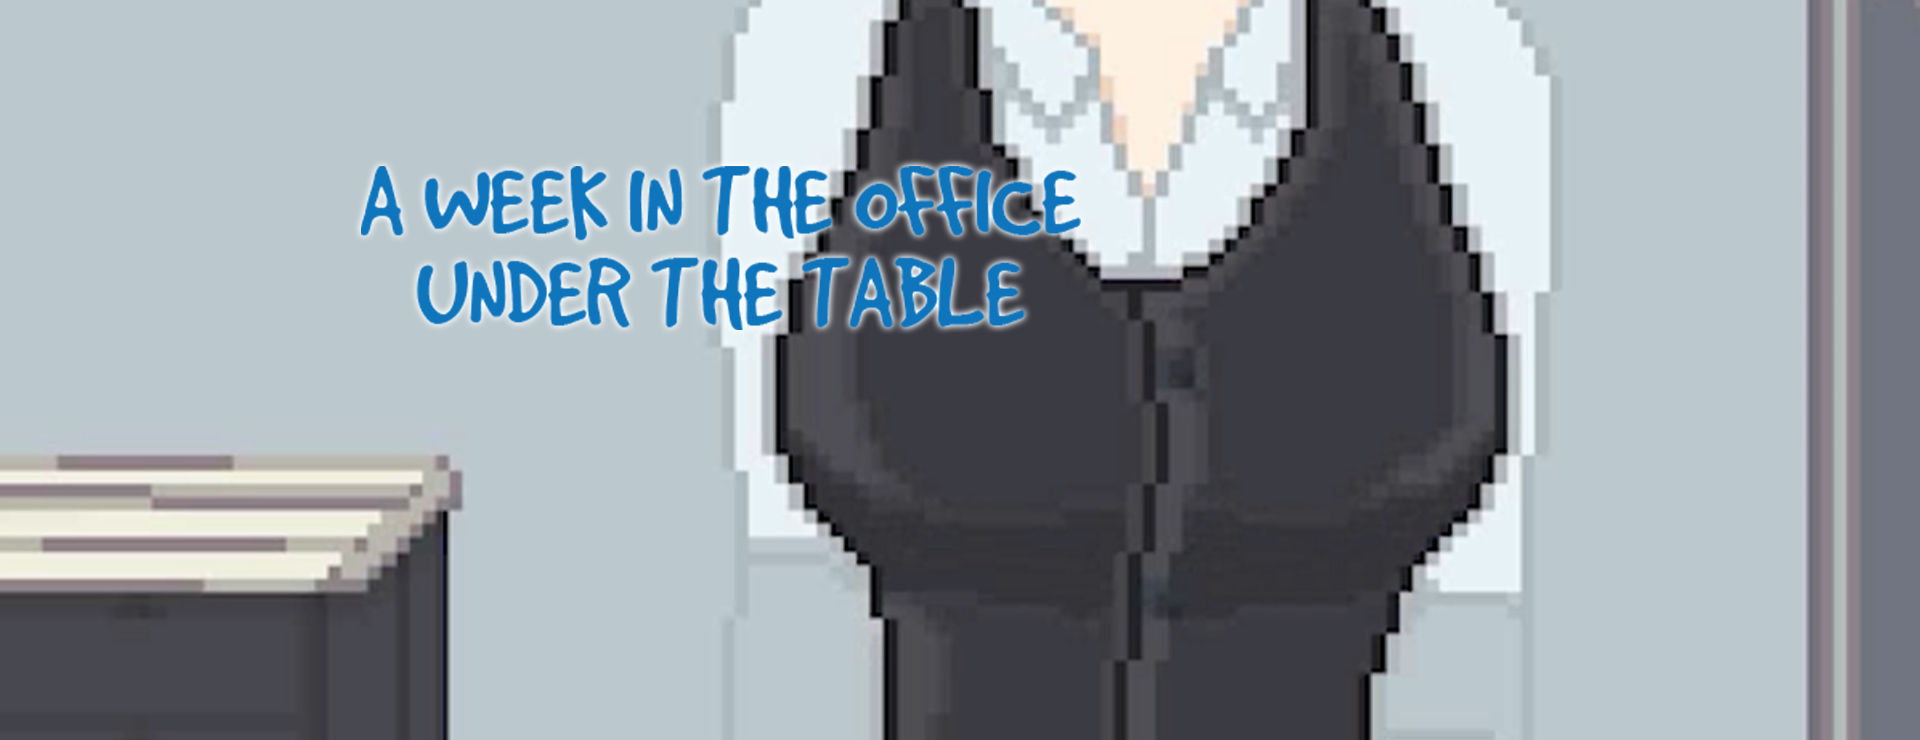 A Week in the Office -Under the Table- - Simulation Game